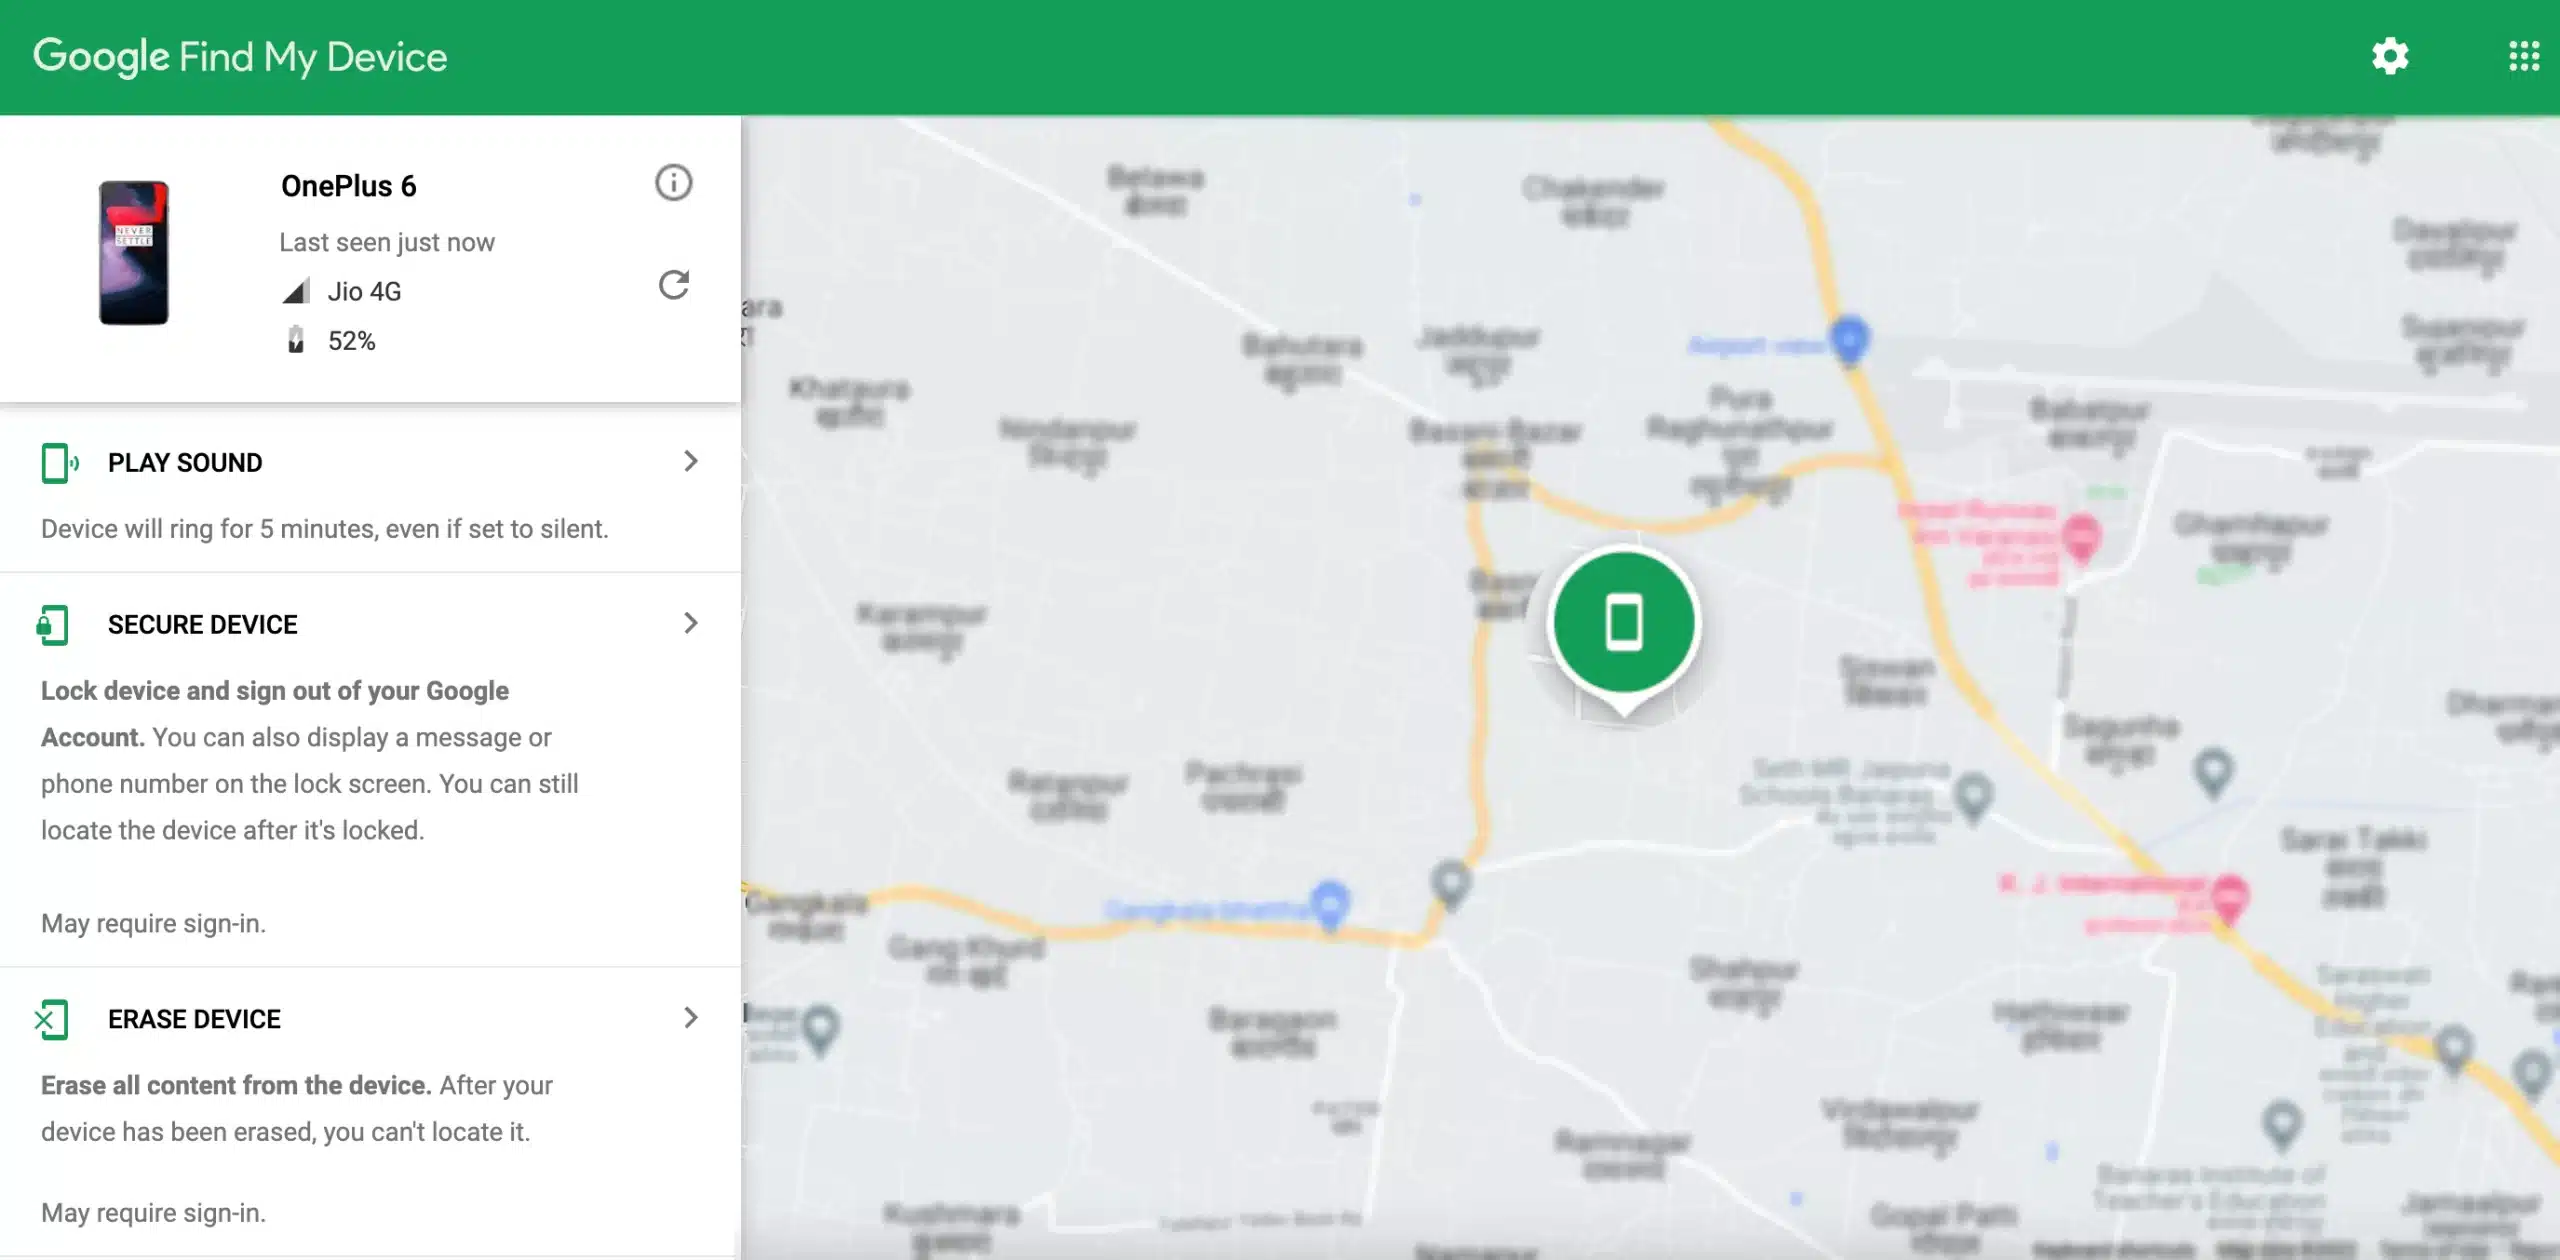 How to Trace and Find out Missing Android Mobile Phone using Google's Find My Device?